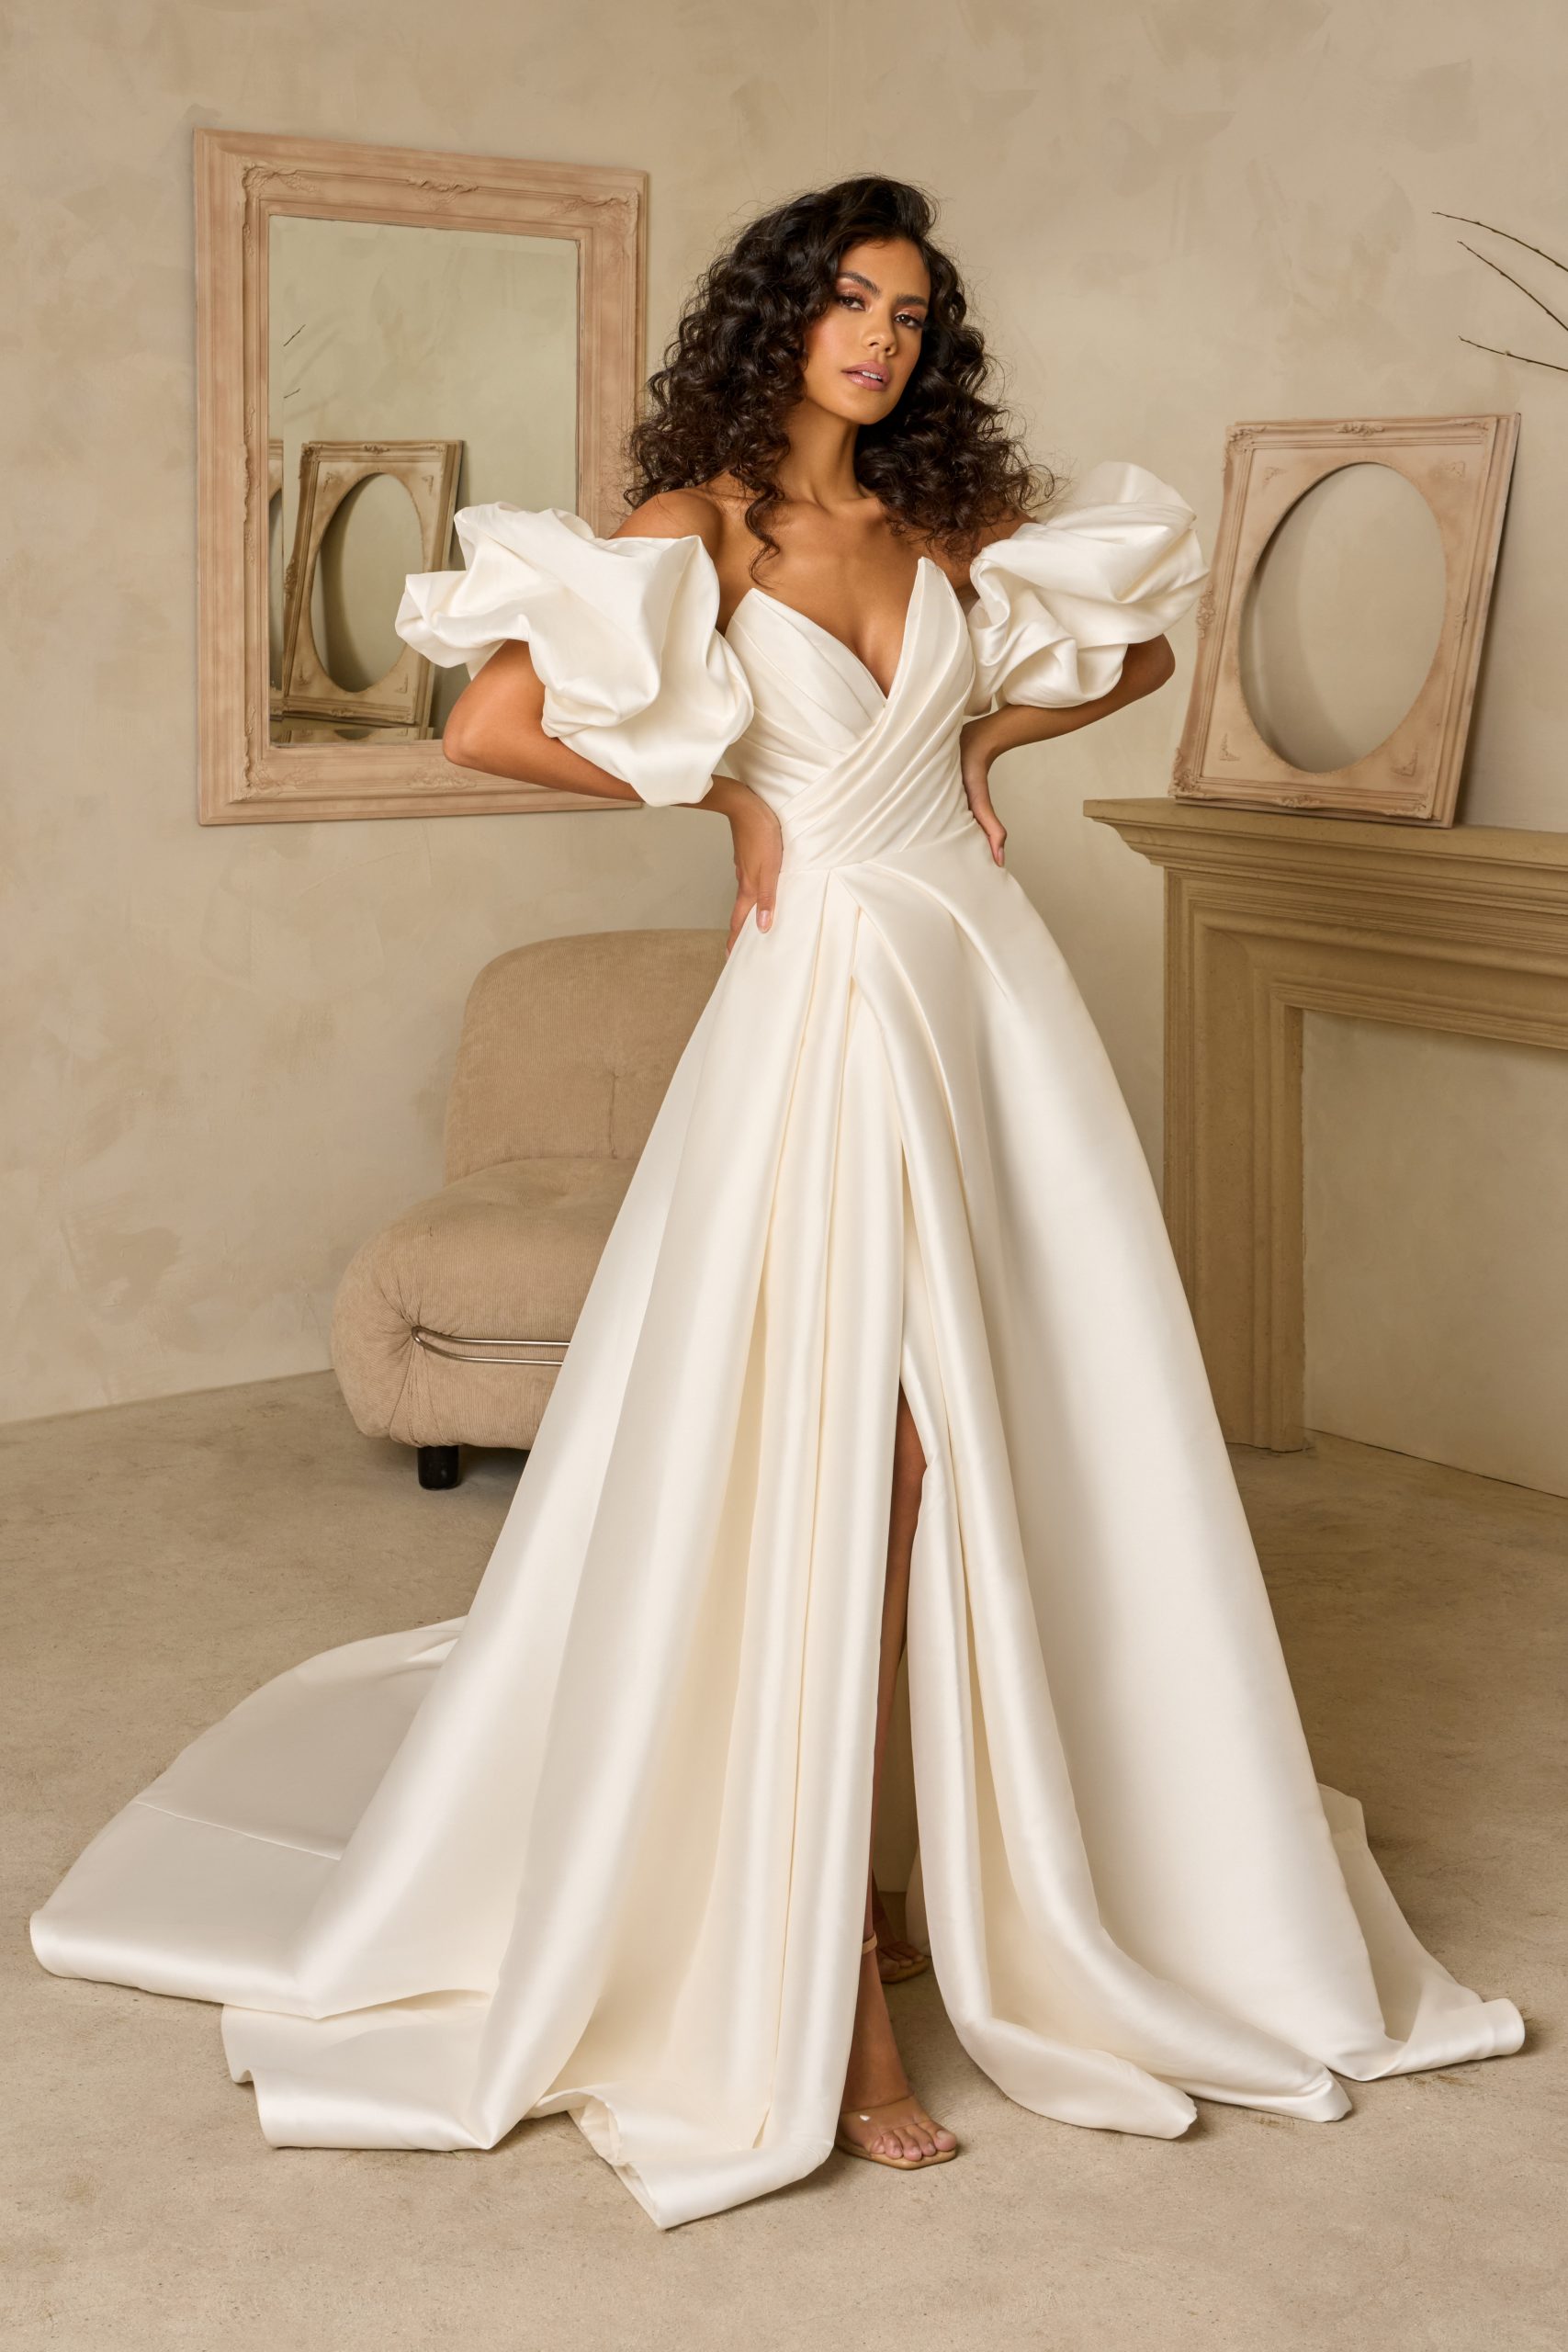 COUTURE Dresses | GRACE(SLEEVES) | KITTYCHEN Gowns – Wedding Bridal